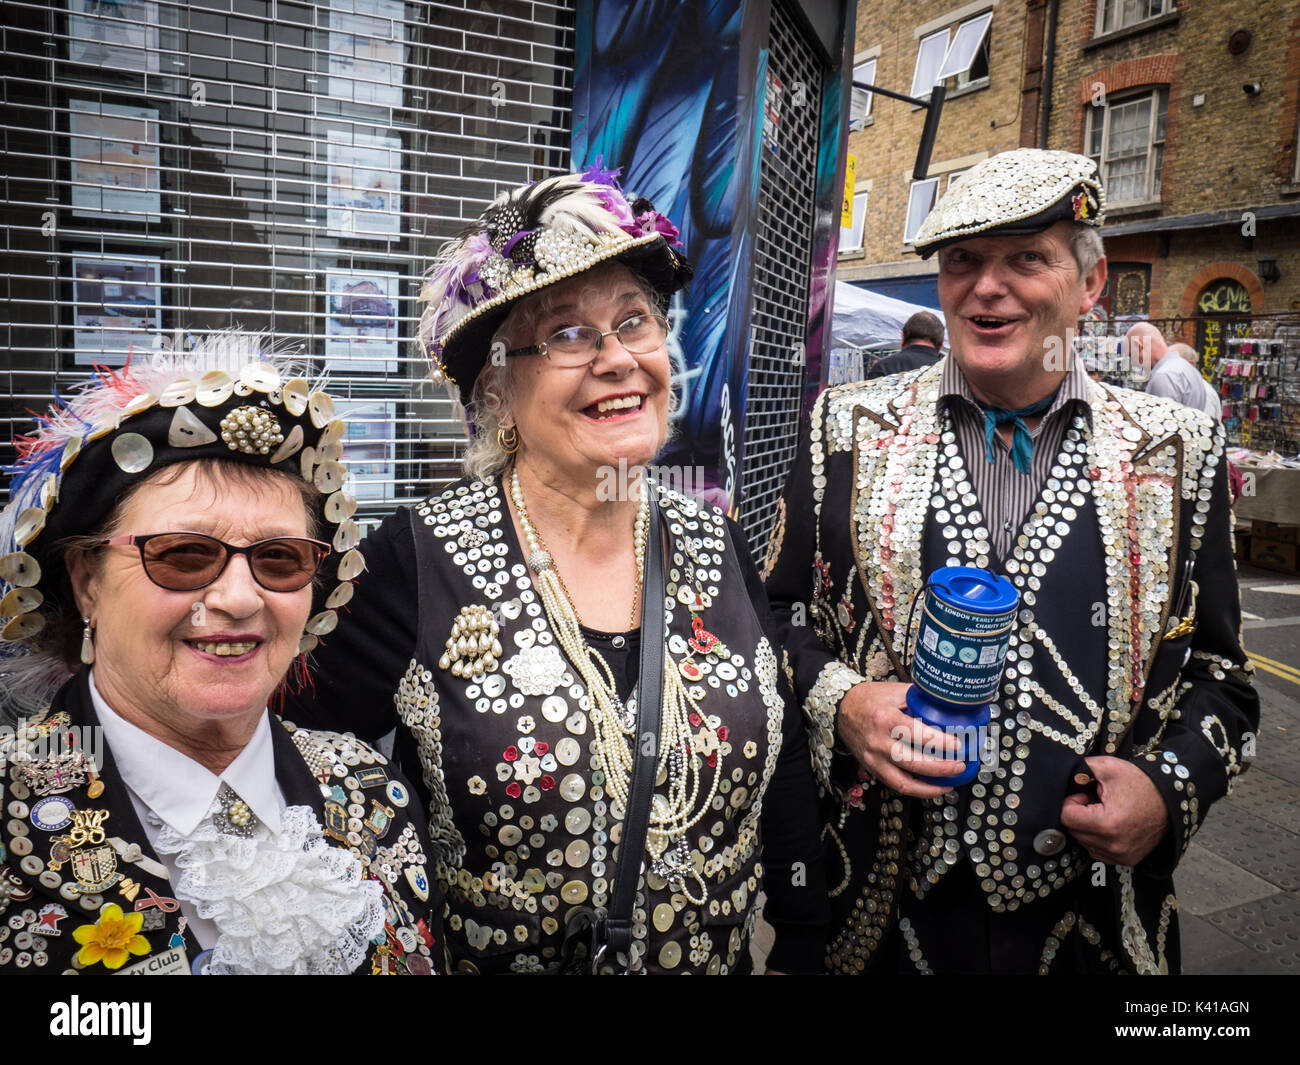 London Pearly Kings and Queens collect money for Charity on Sunday mornings in London's popular Brick Lane market in Spitalfields, East End, London UK Stock Photo